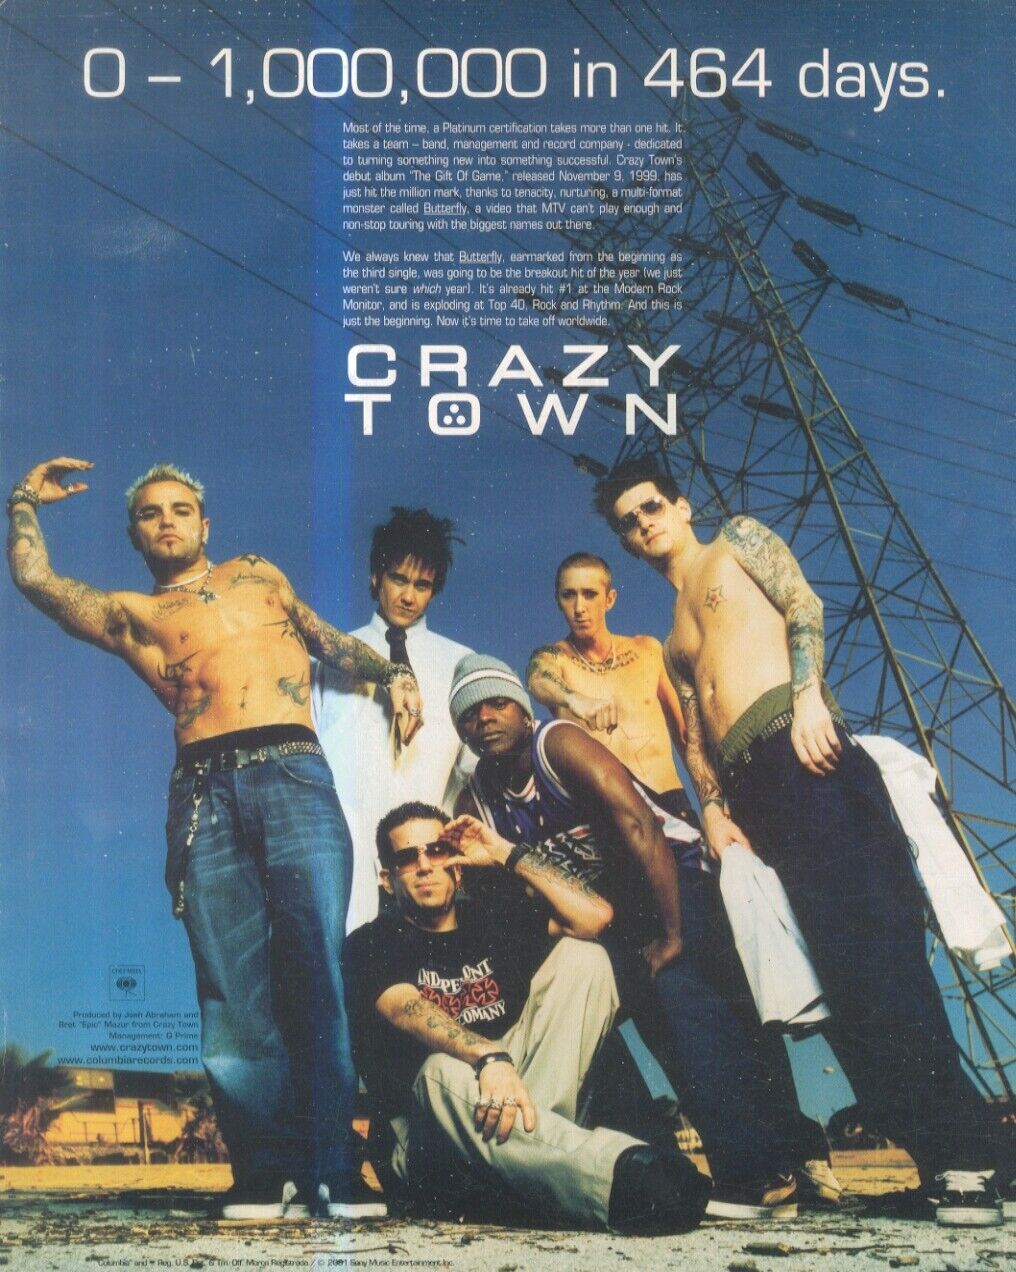 FRAMED ADVERT/PICTURE 13X11 CRAZY TOWN